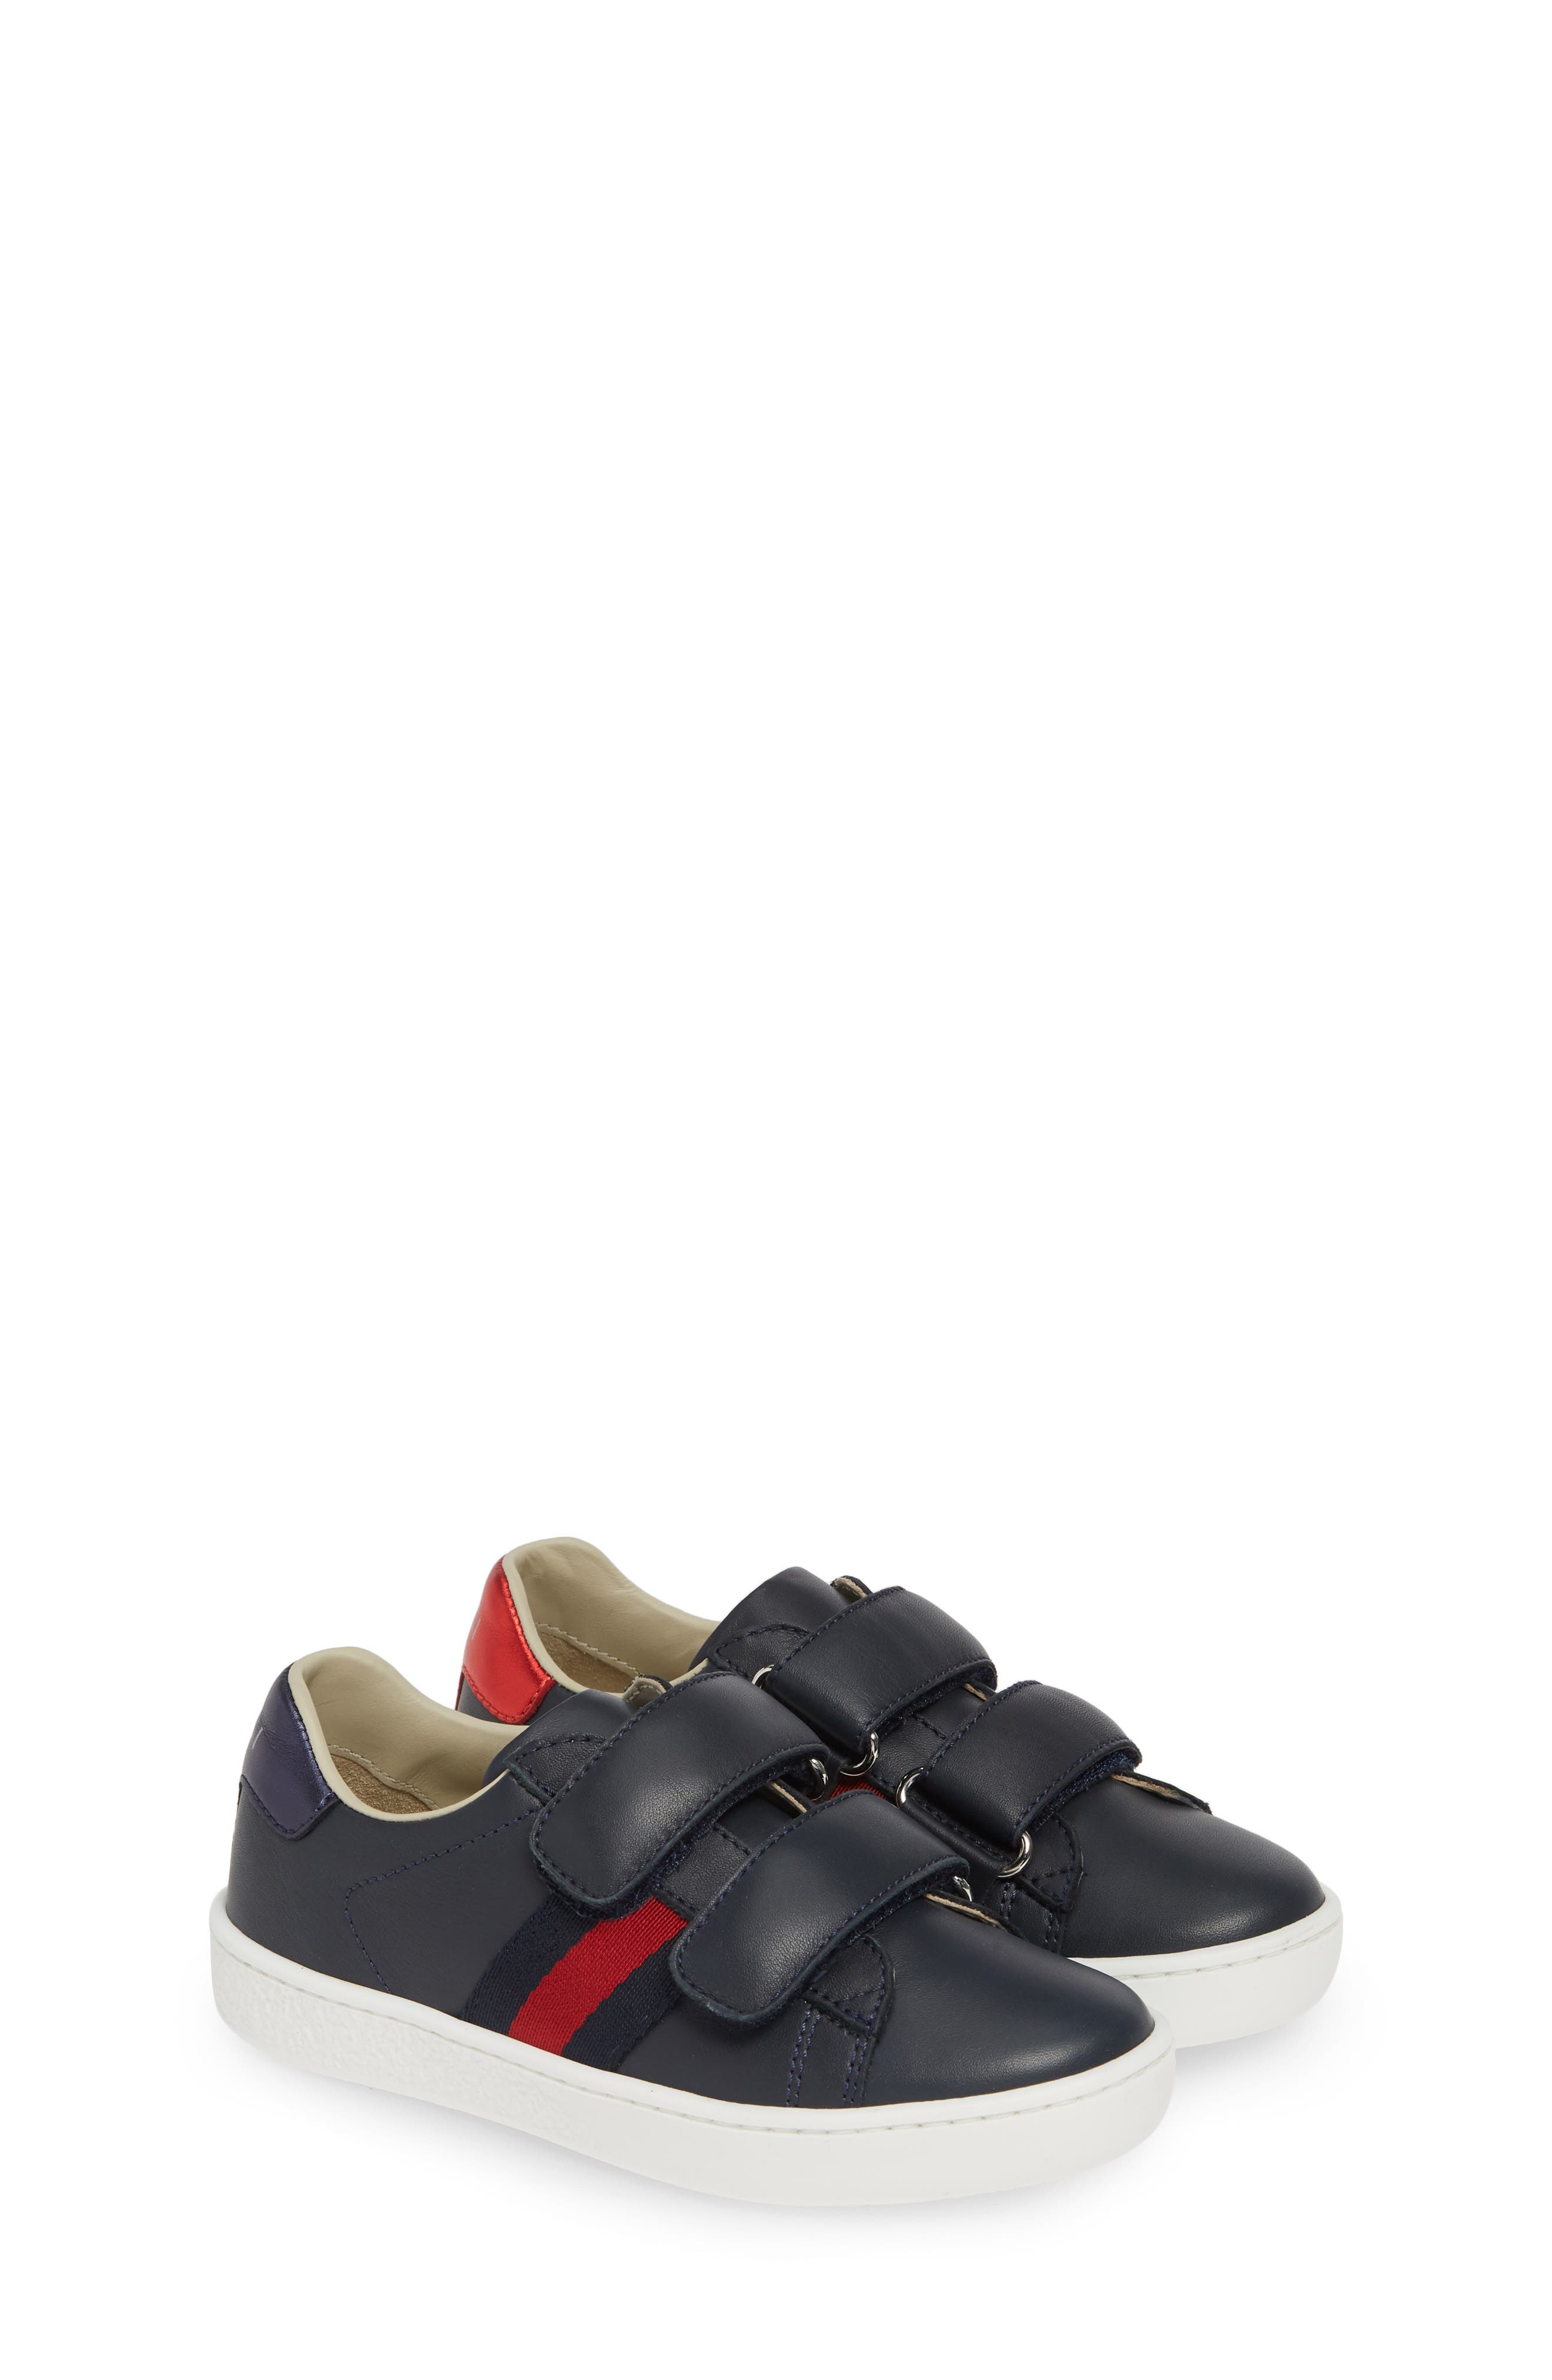 Toddler Gucci Shoes (Sizes 7.5-12 